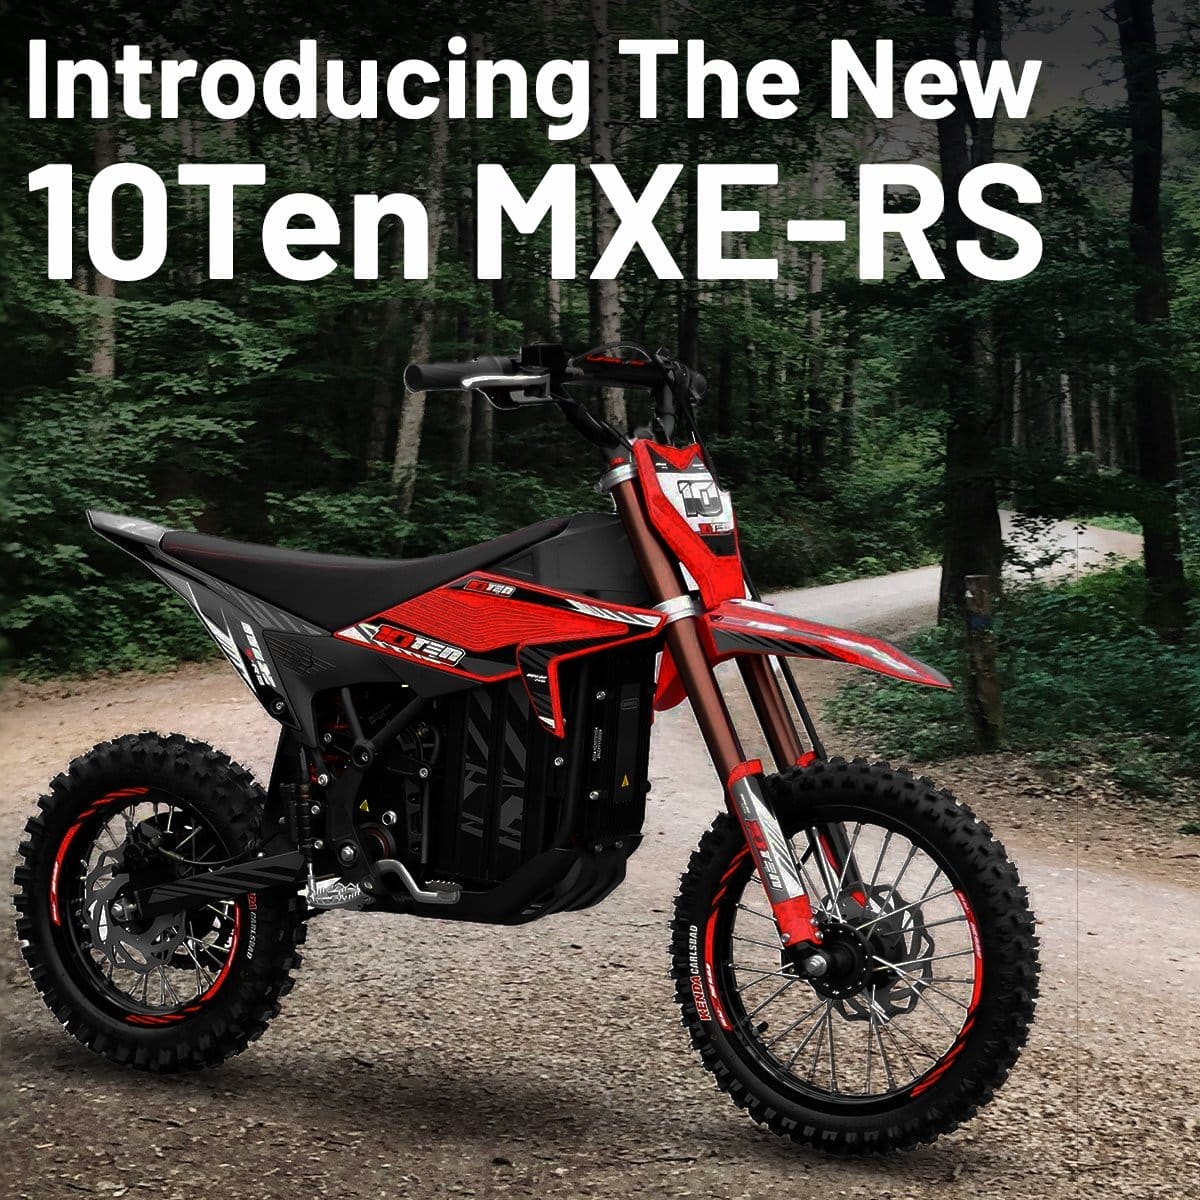 Introducing The New 10Ten MXE-RS